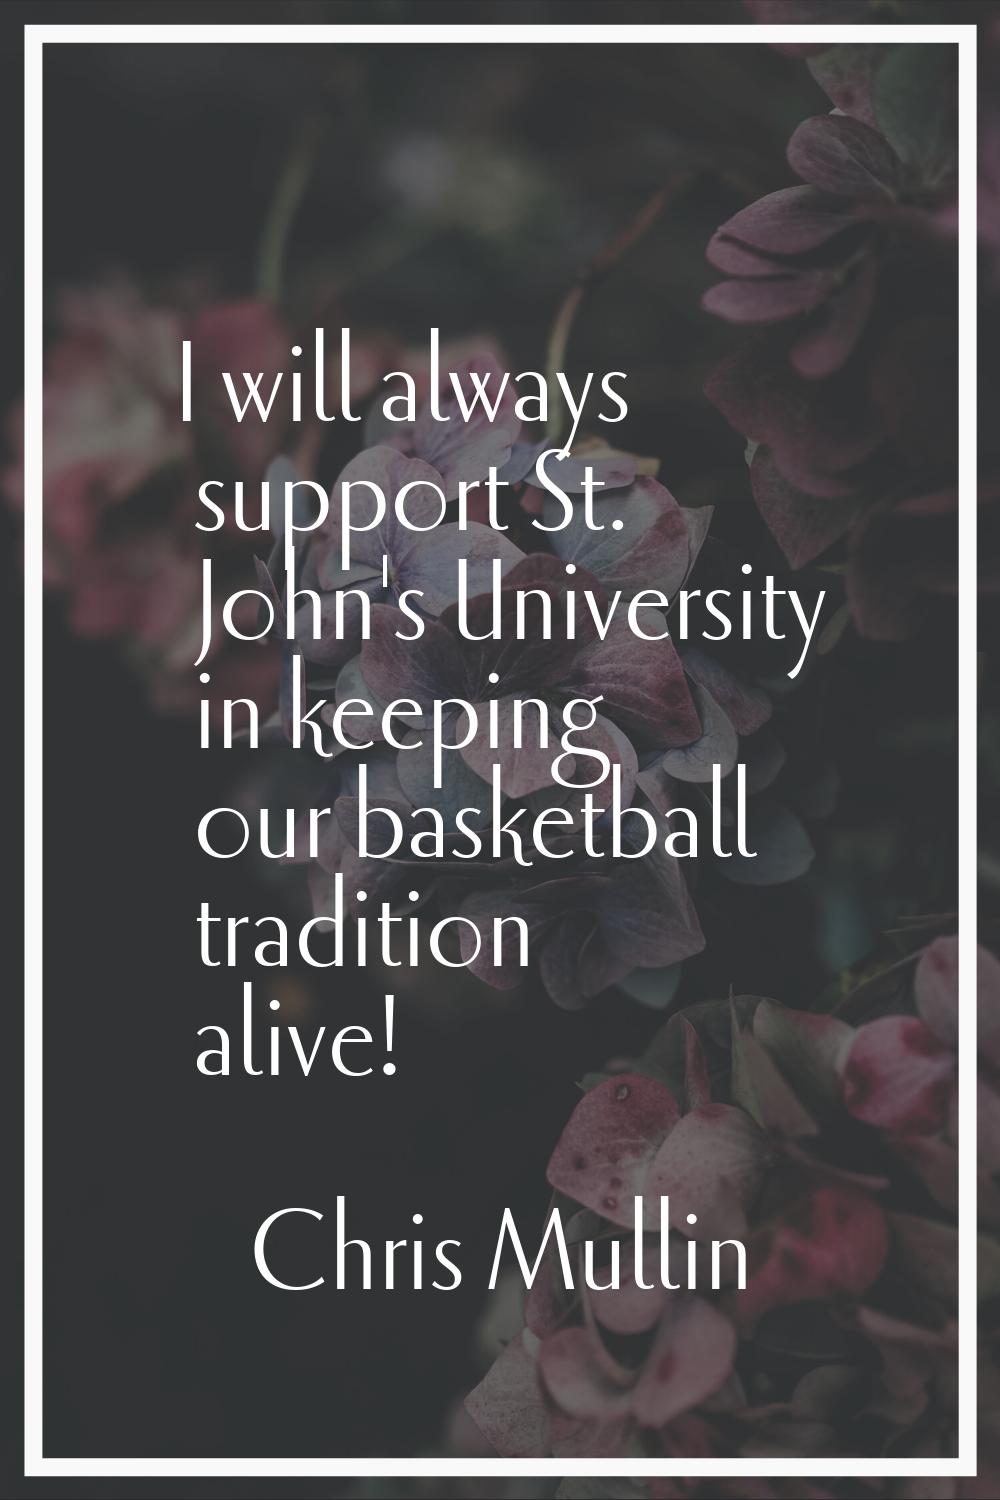 I will always support St. John's University in keeping our basketball tradition alive!